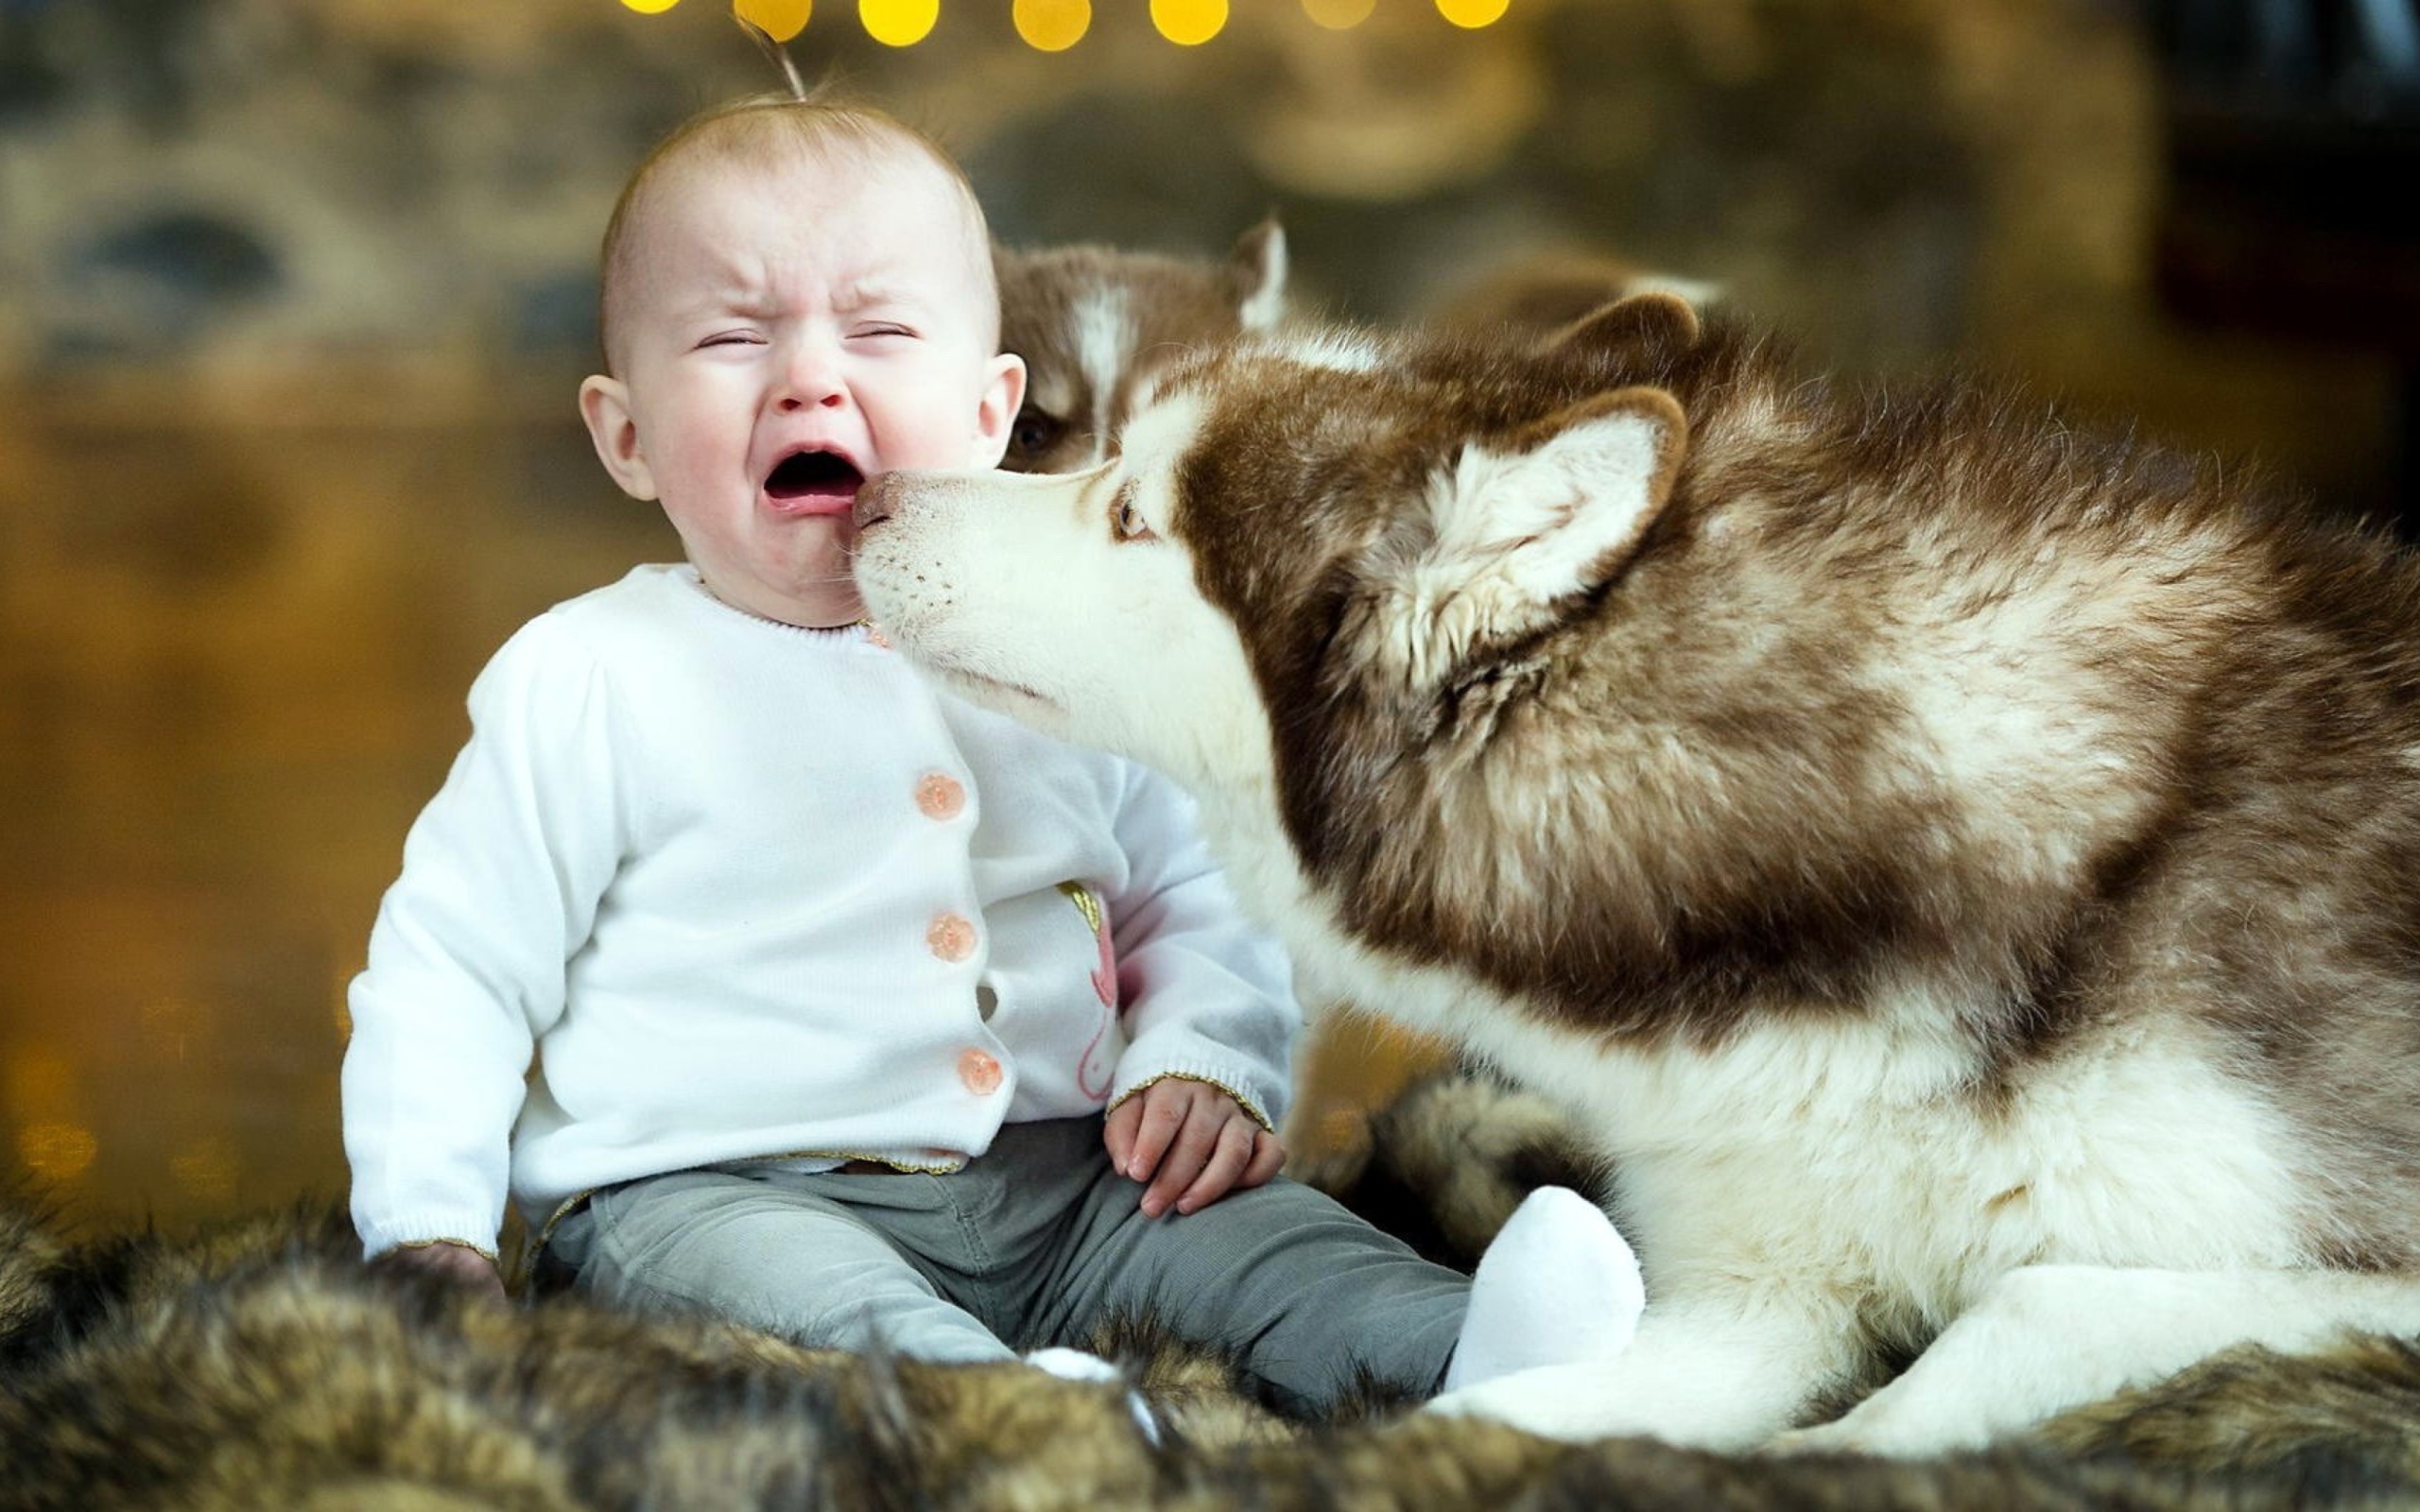 Baby and Dog wallpaper 2560x1600